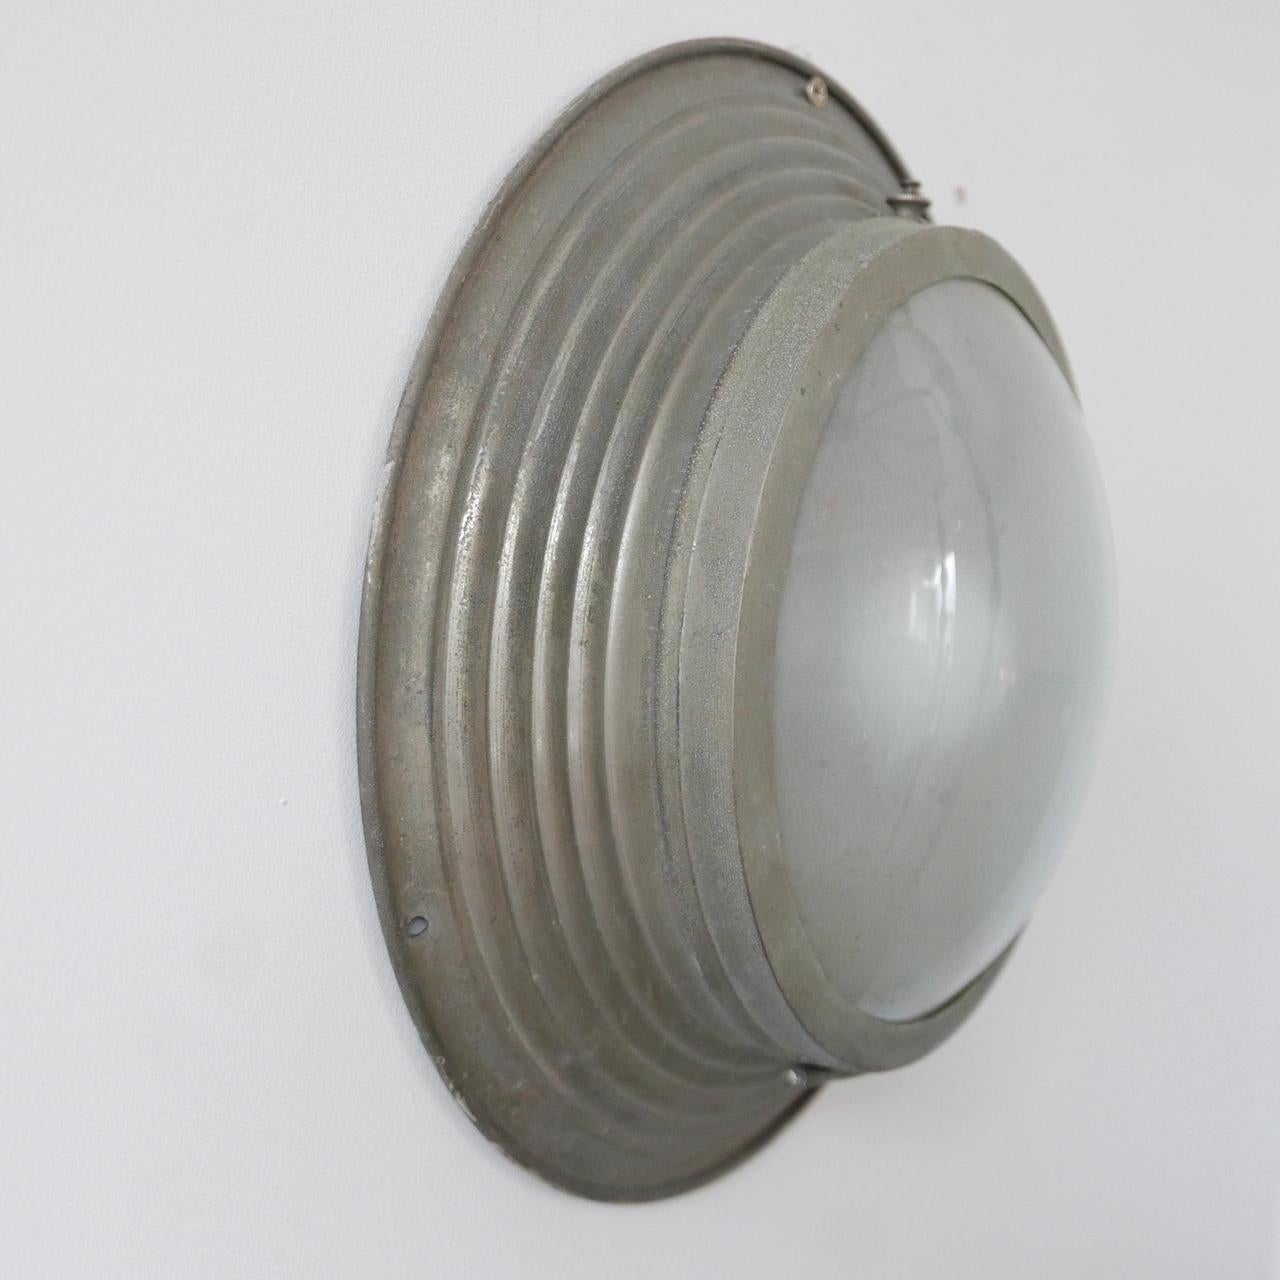 Mid-20th Century Single Etched Glass Metal 'Bulkhead' Style Wall or Ceiling Light